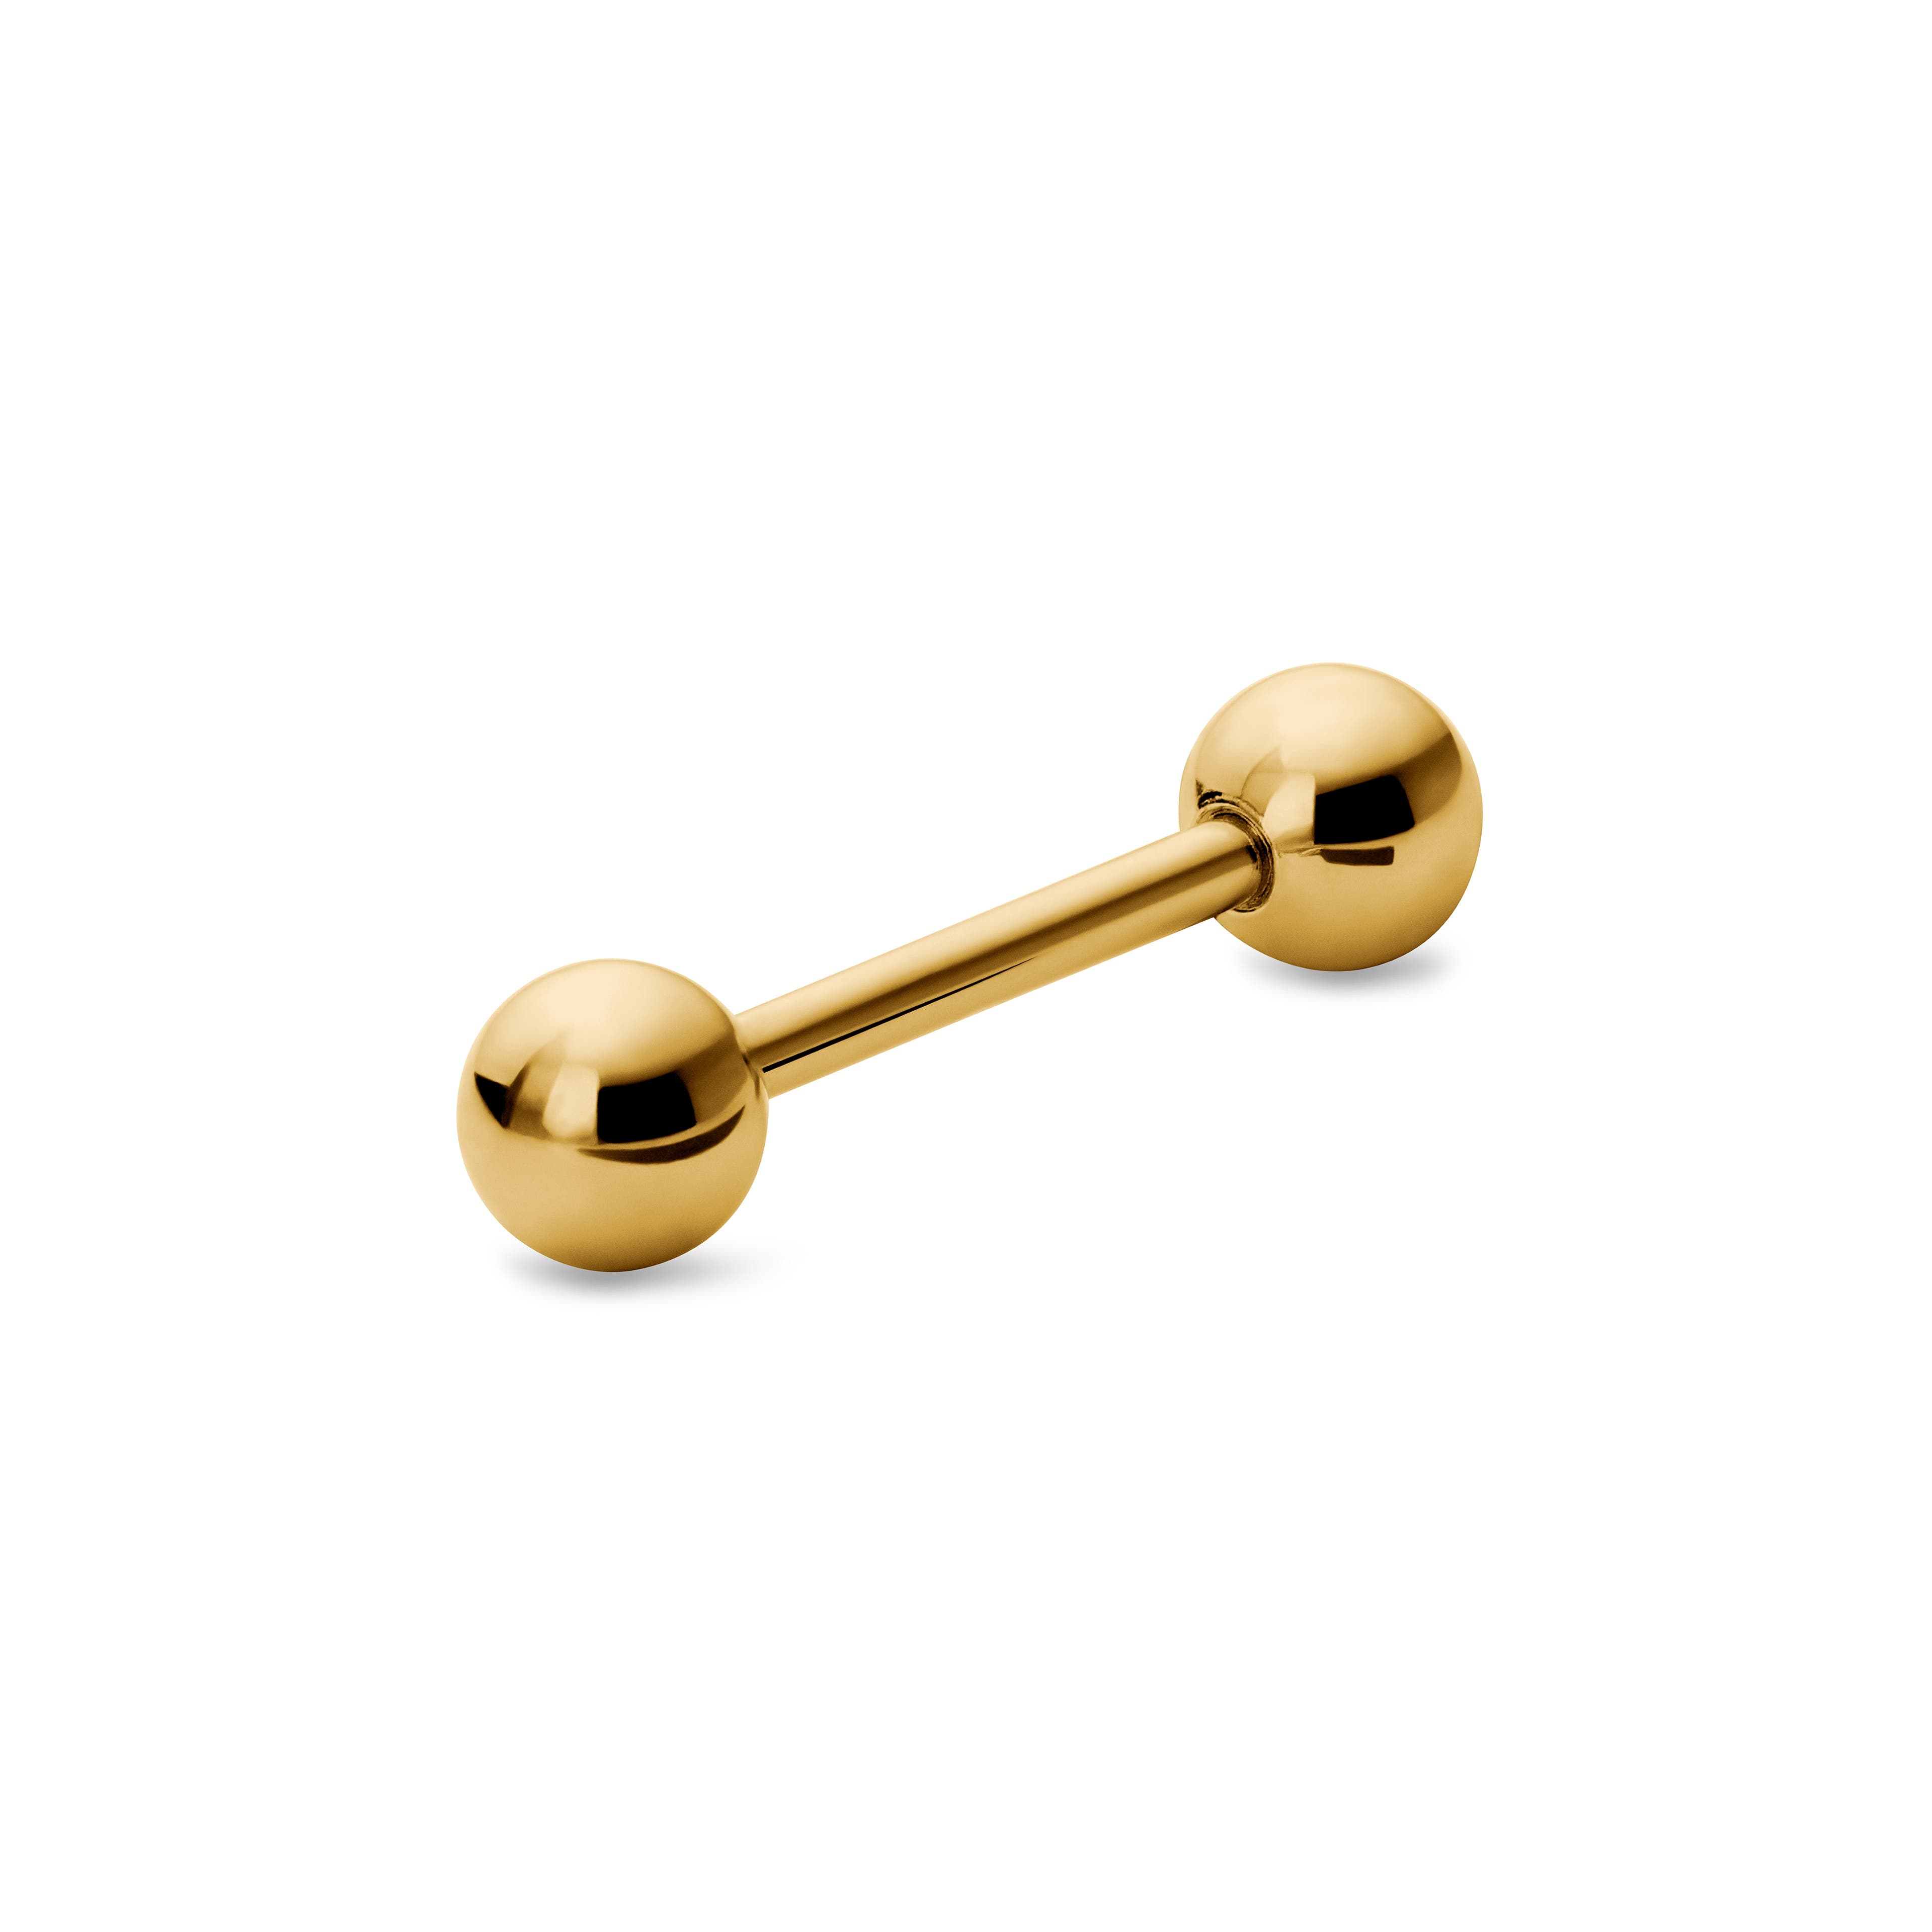 6 mm Gold-Tone Straight Ball-Tipped Surgical Steel Barbell